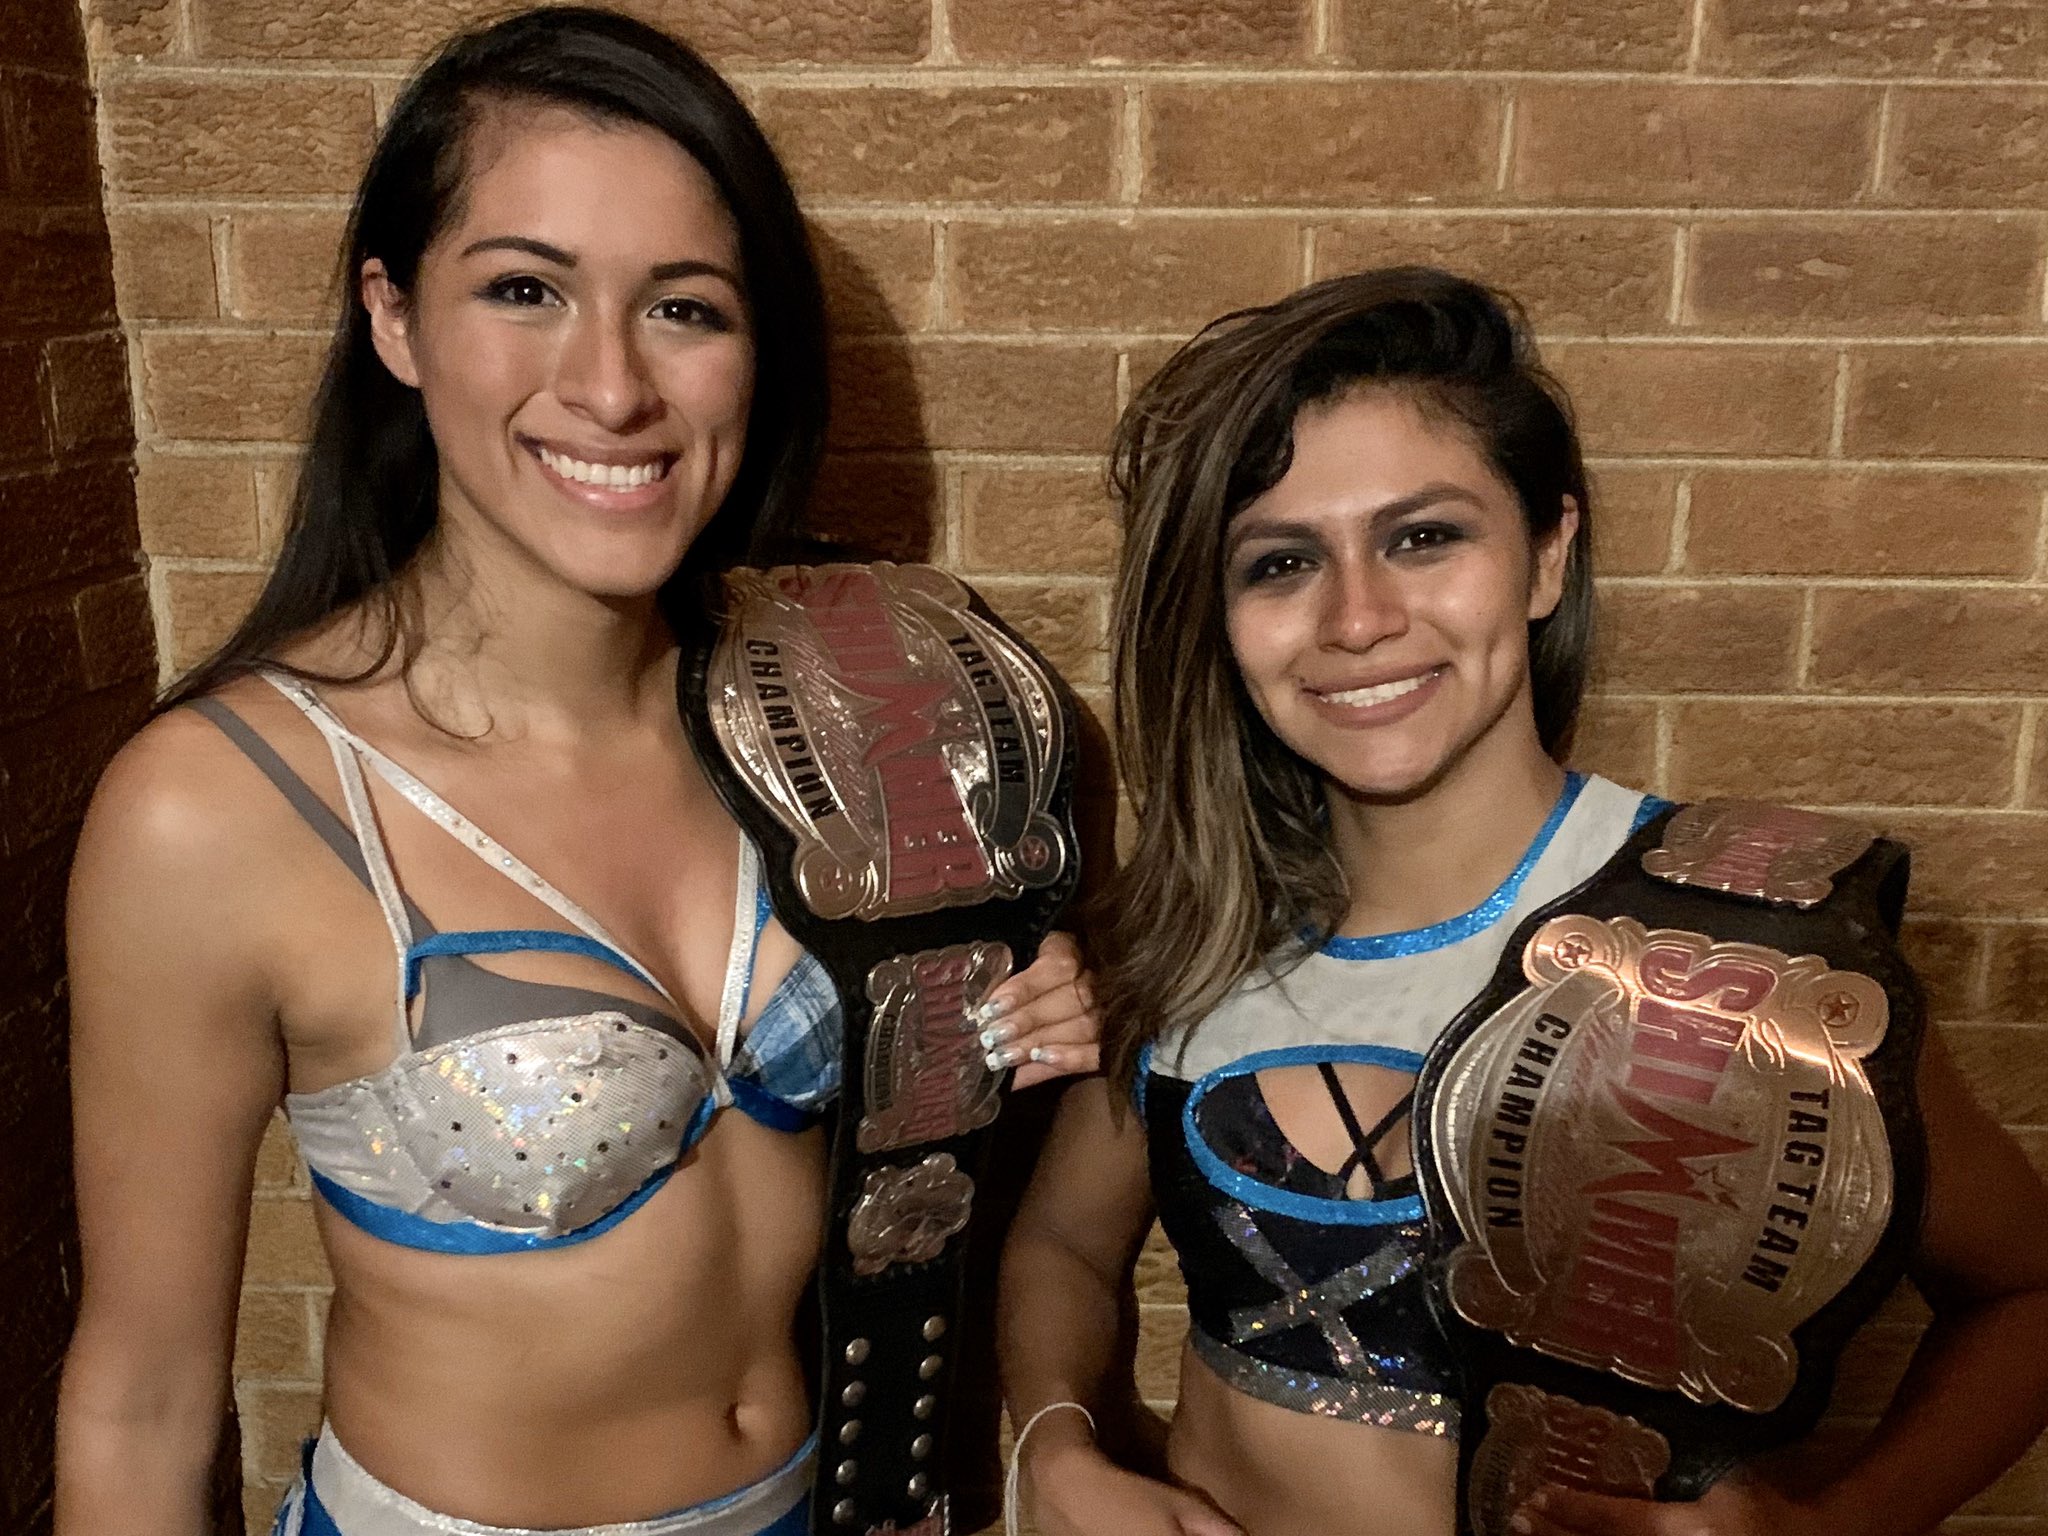 Team Sea Stars won the SHIMMER Tag Team Titles from Cheerleader Melissa and...